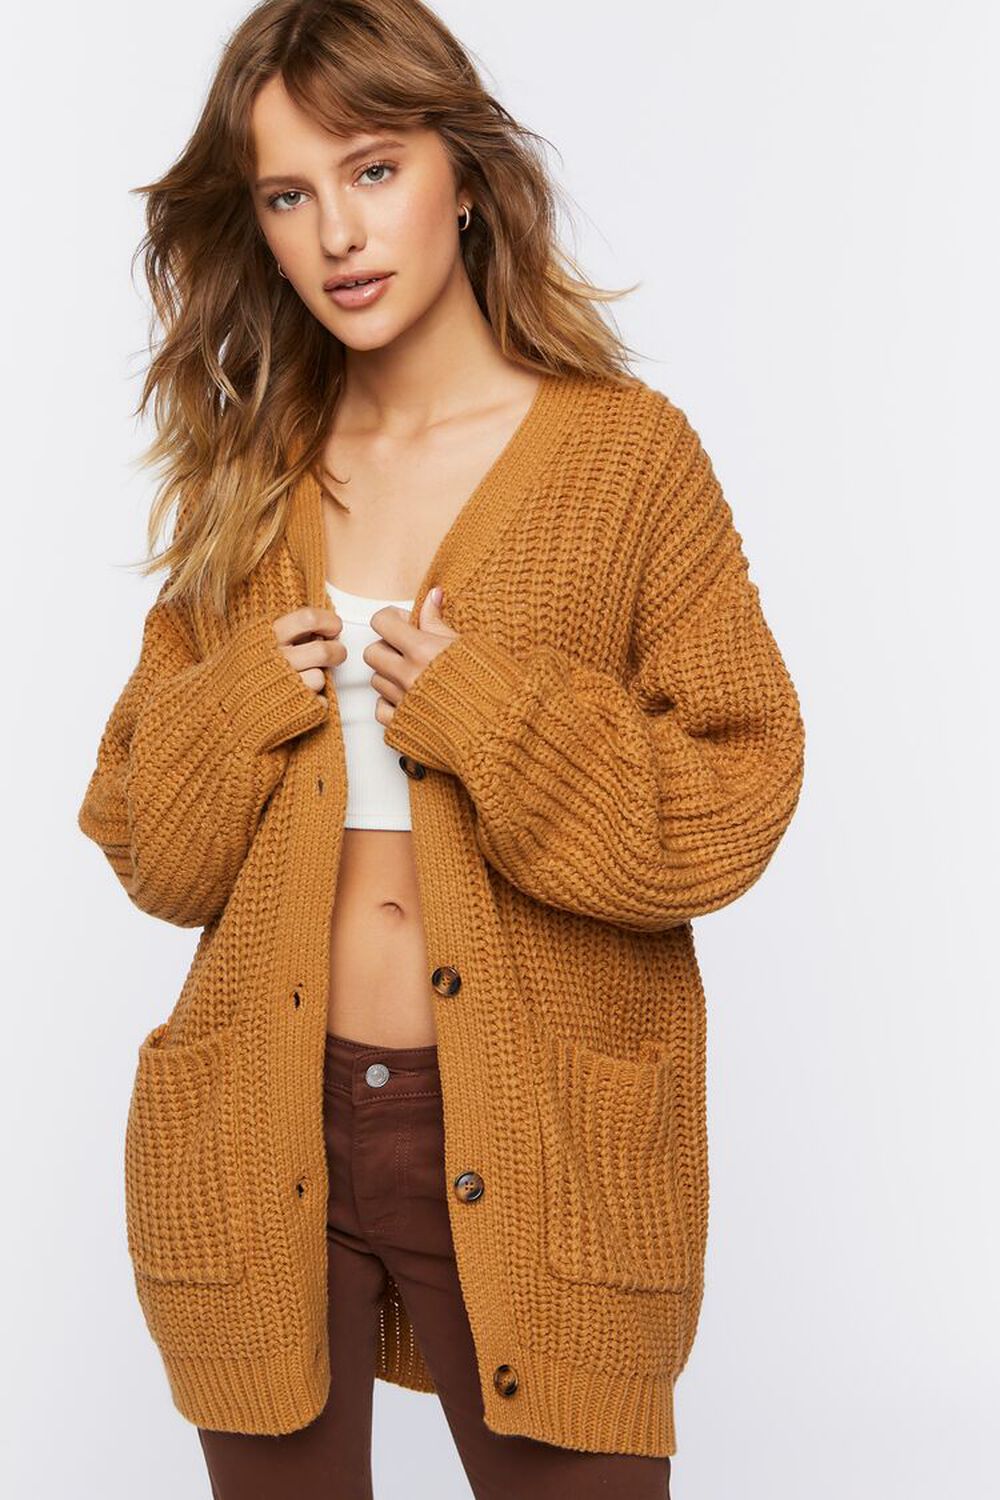 11. Forever 21 Chunky Knit Cardigan Sweater